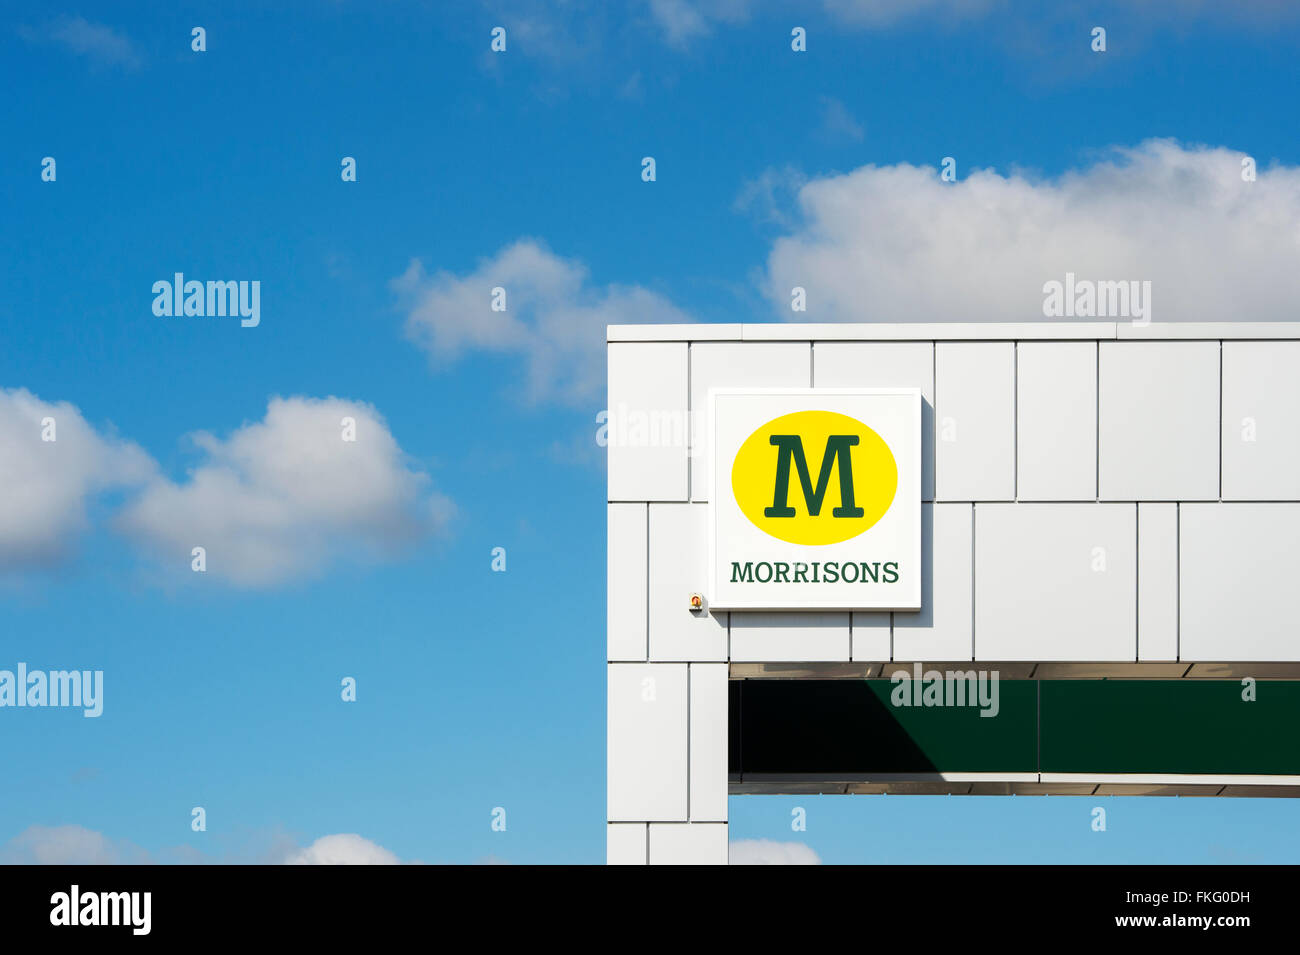 Morrisons supermarket sign against a blue cloudy sky Stock Photo